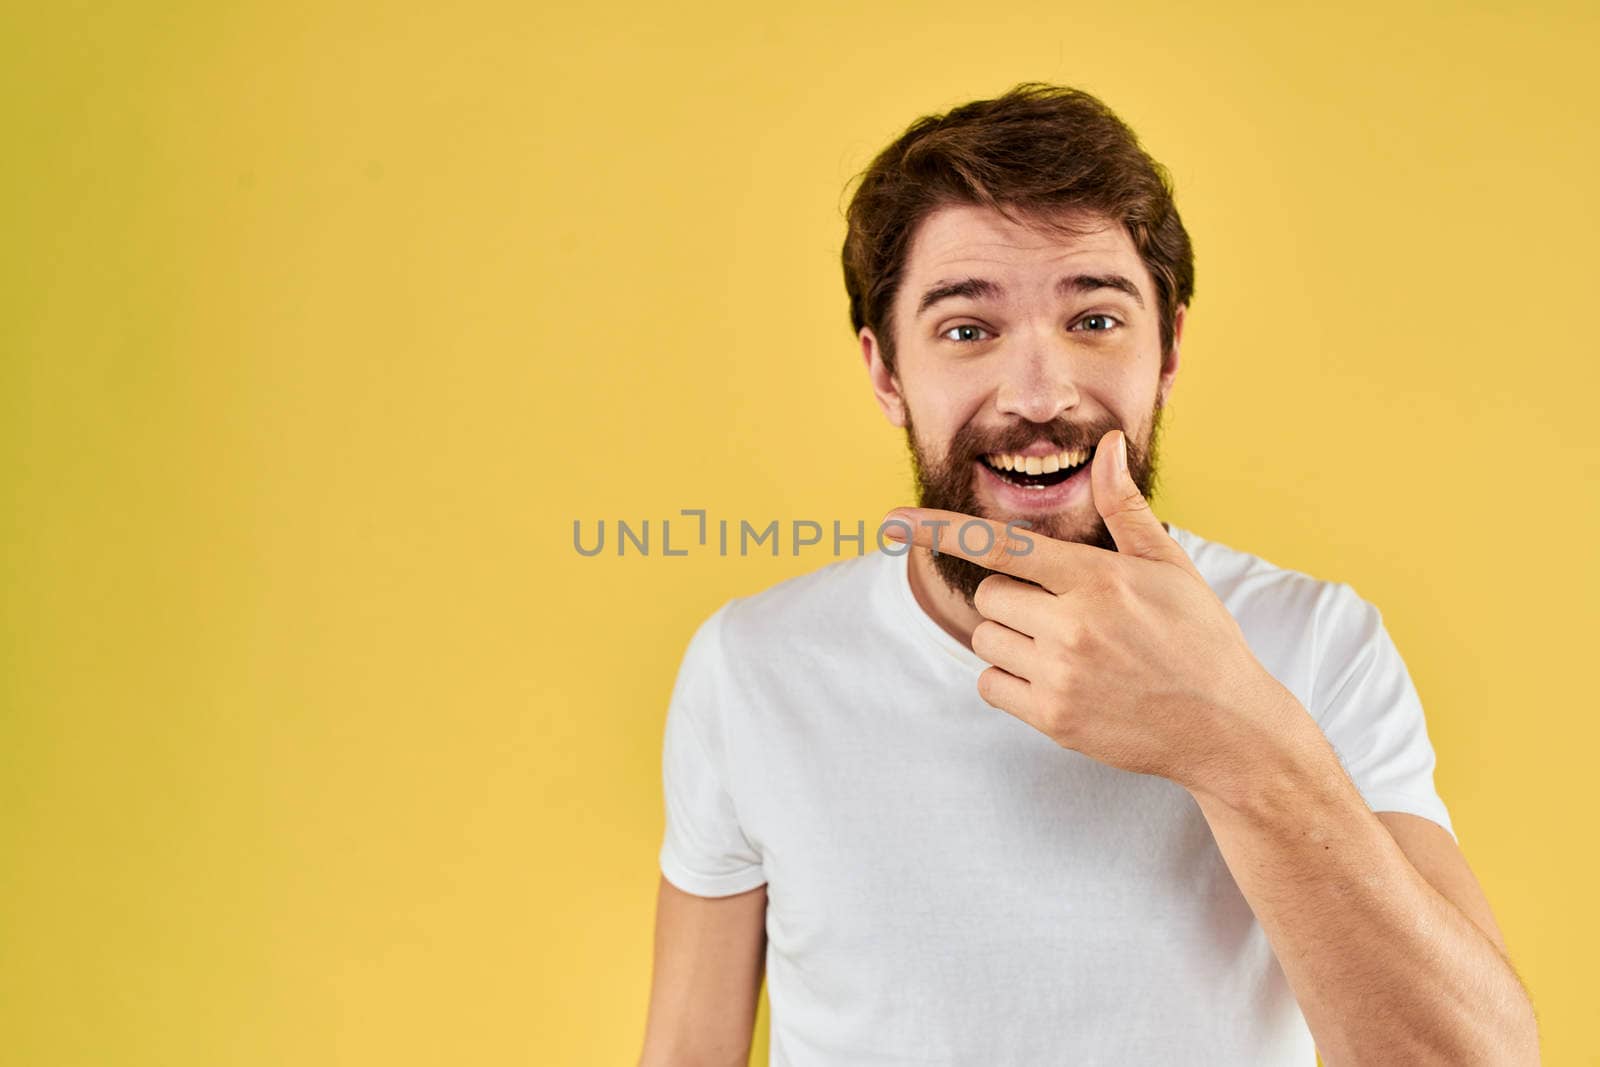 Bearded man emotions fun gesture with hands white t-shirt close-up yellow background. High quality photo